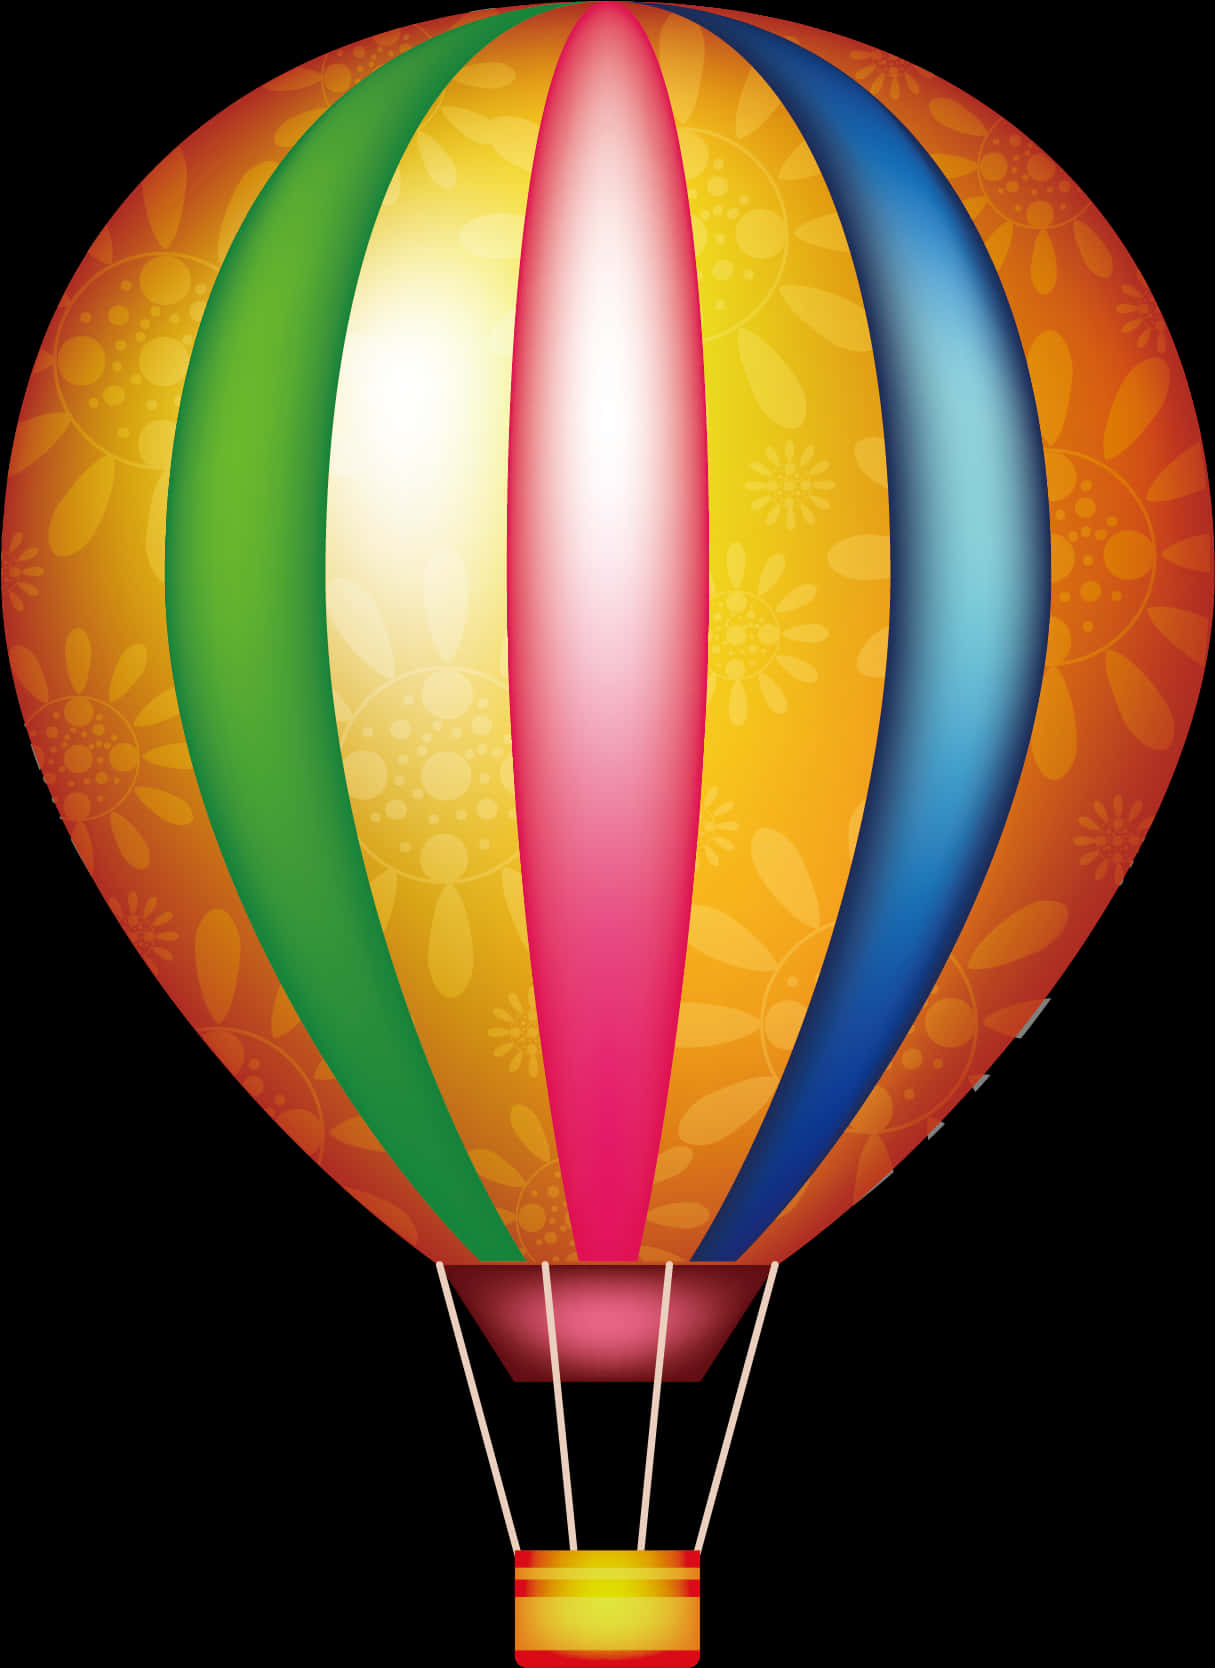 A Hot Air Balloon With A Colorful Pattern